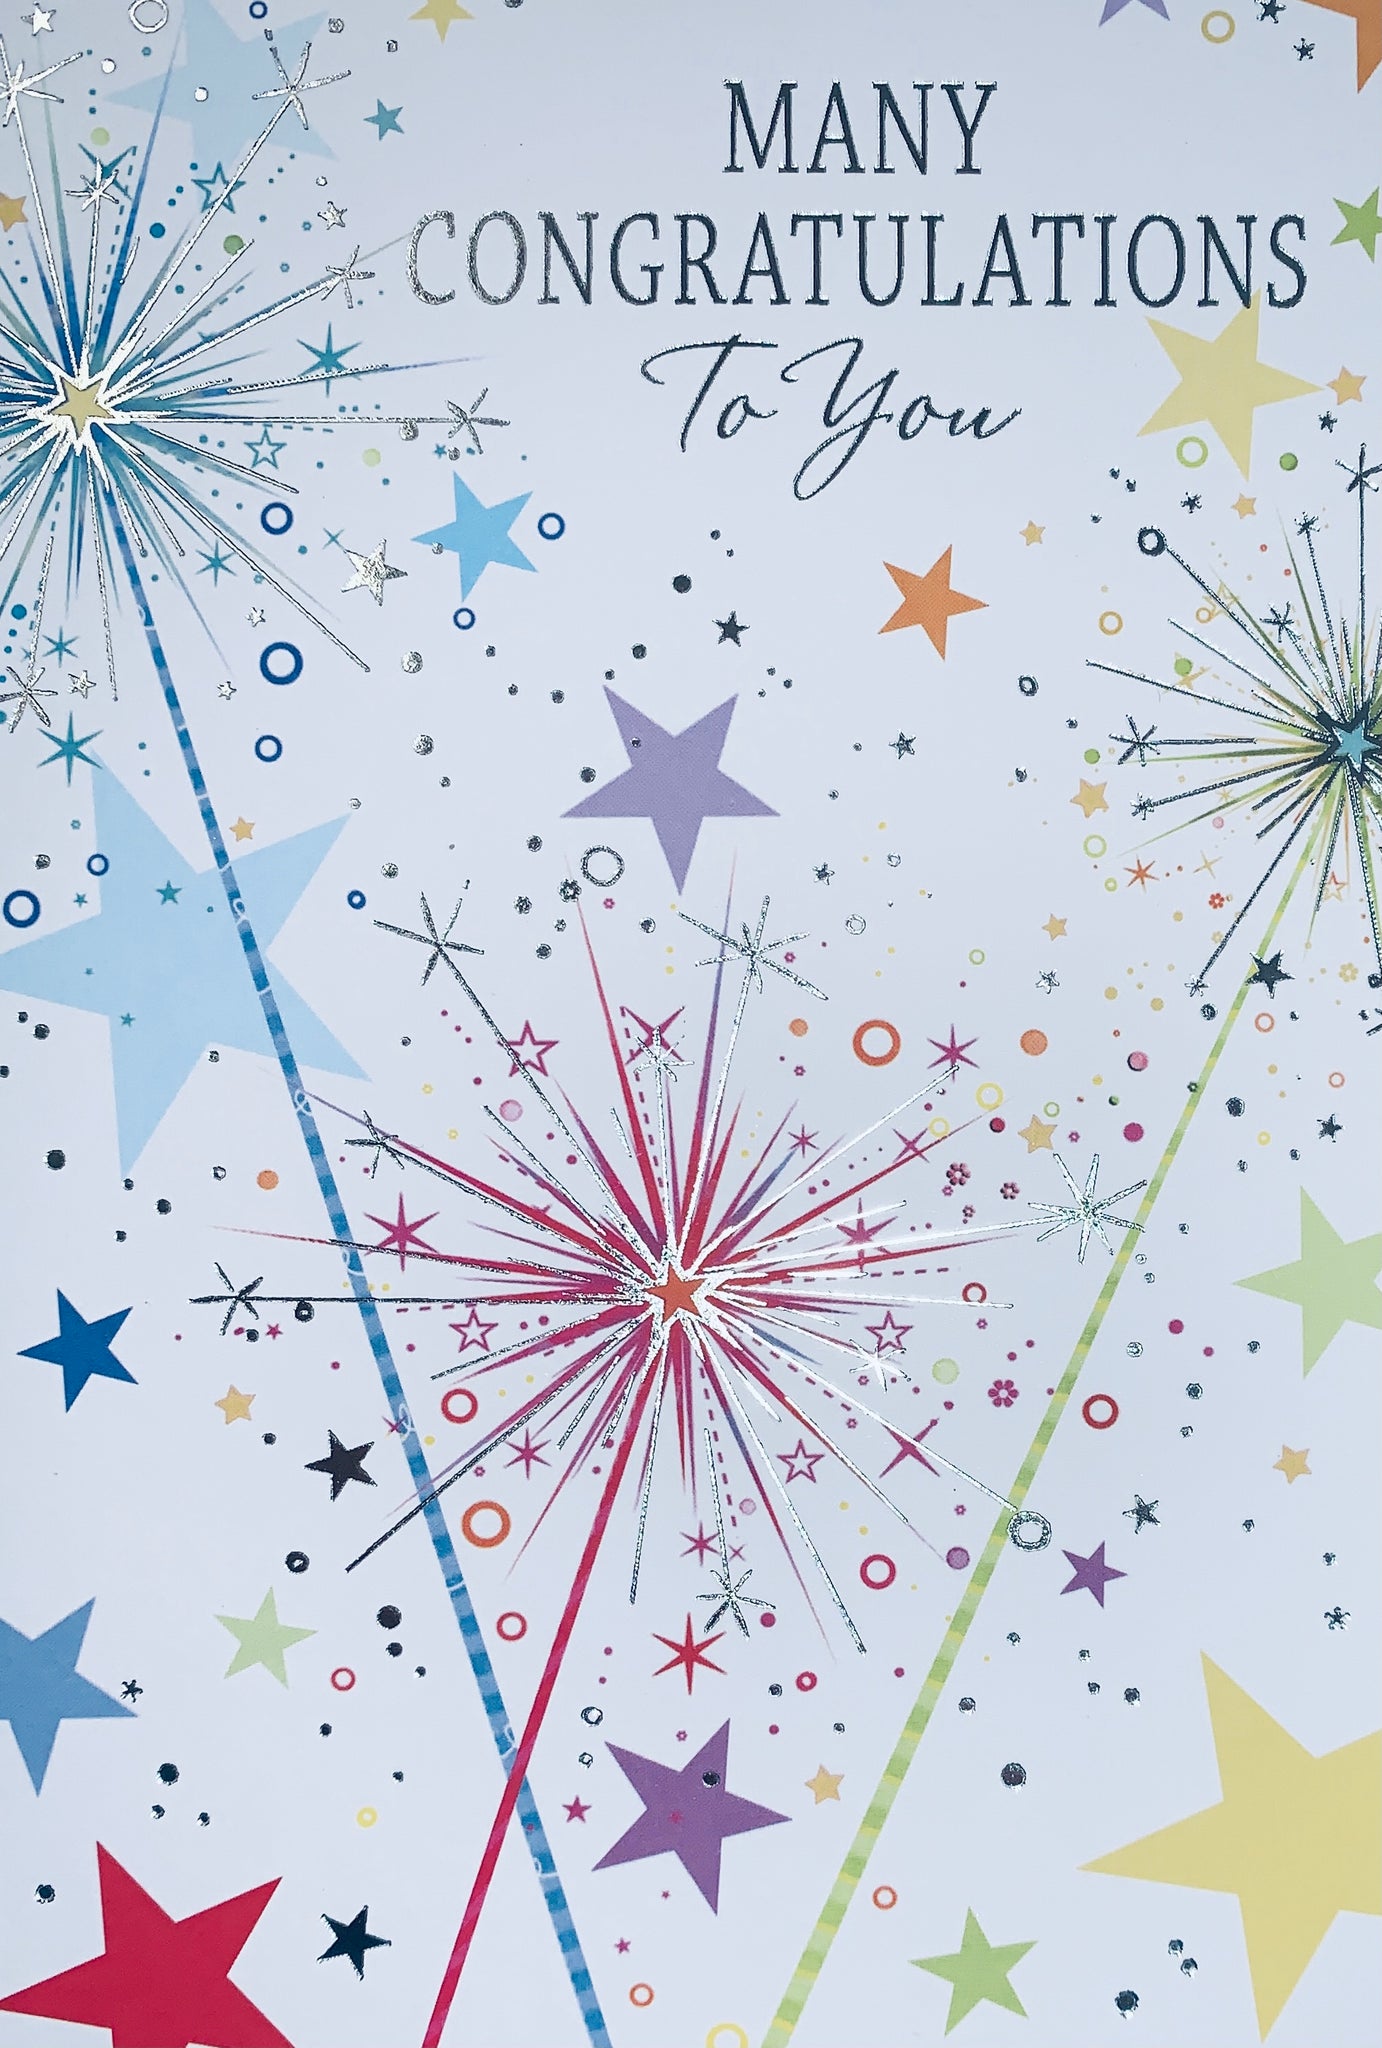 Congratulations card sparklers and stars